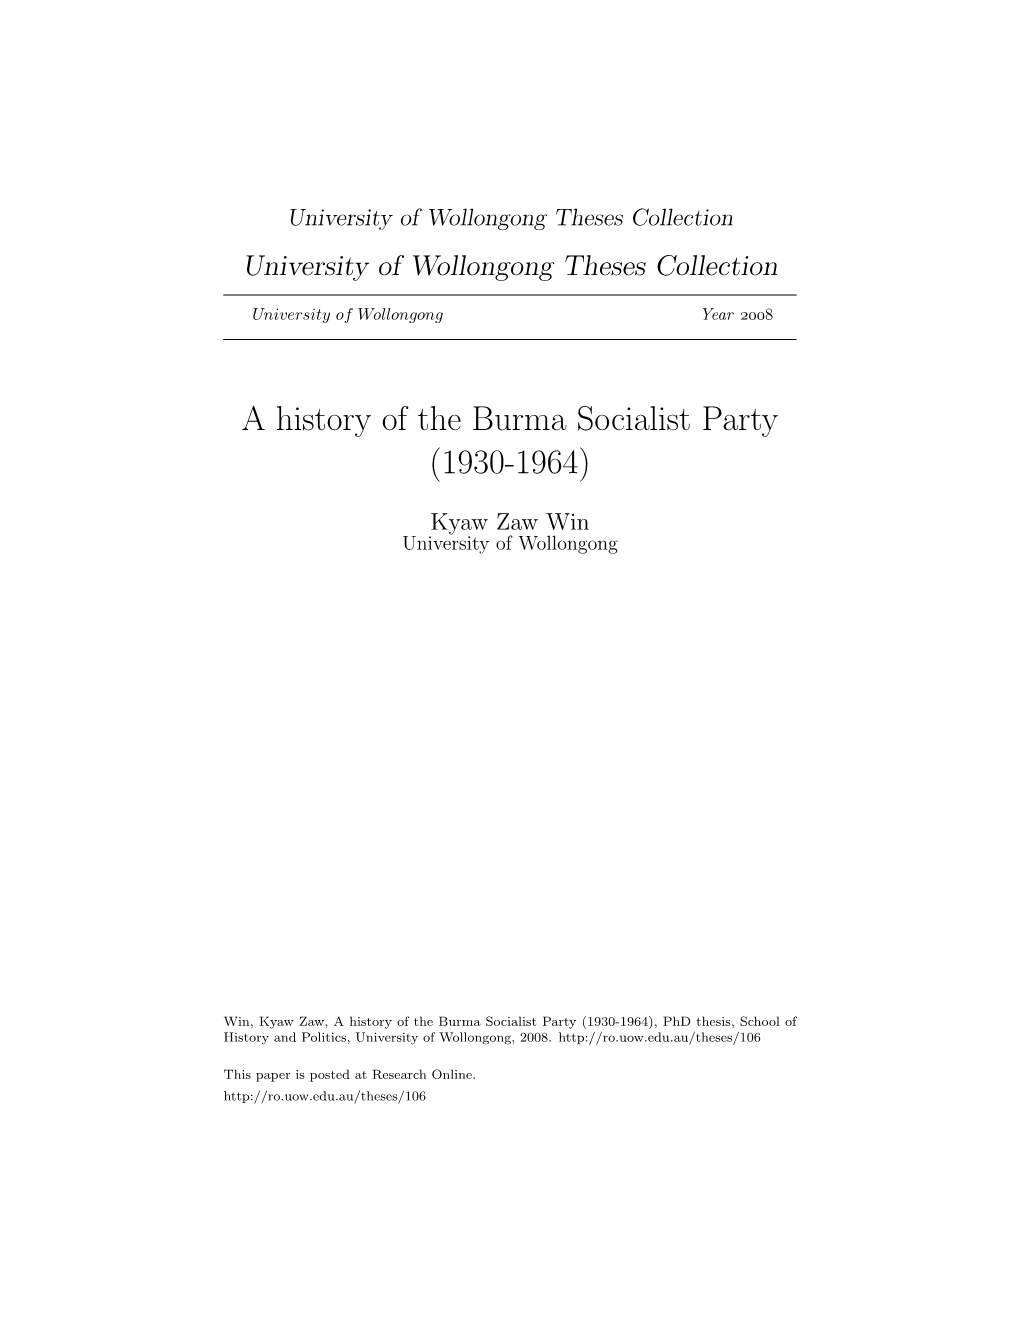 A History of the Burma Socialist Party (1930-1964)